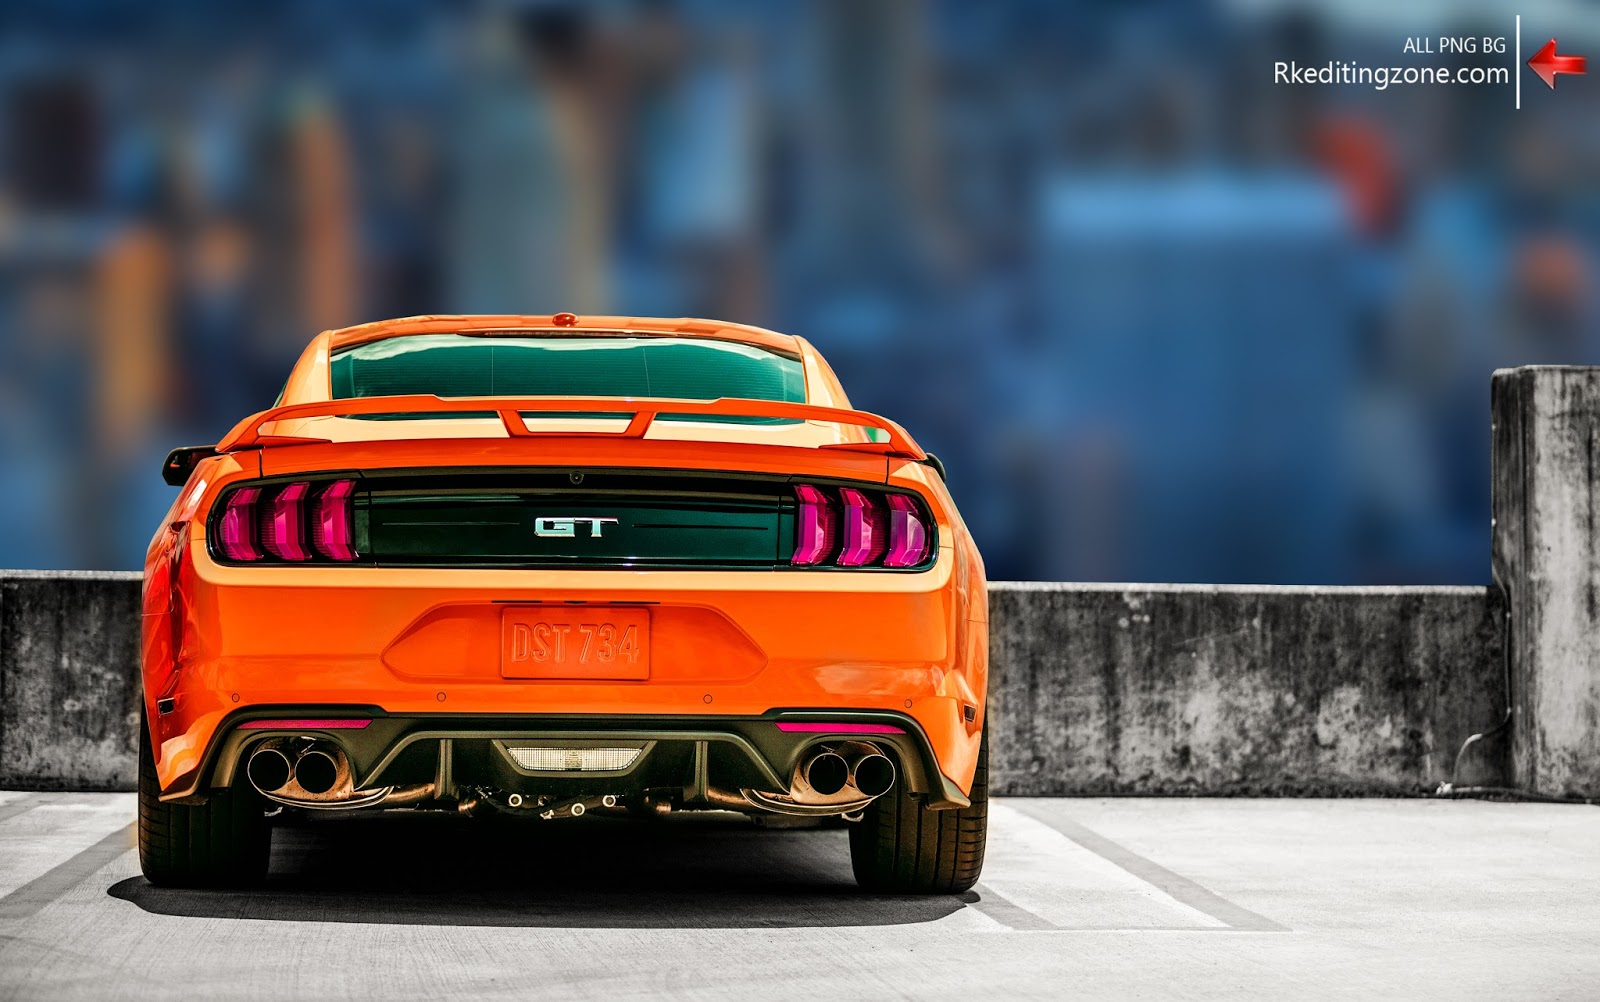 Cb Car Background Hd Png Amatwallpaper Org Of - 2018 Mustang Gt Quad Exhaust , HD Wallpaper & Backgrounds